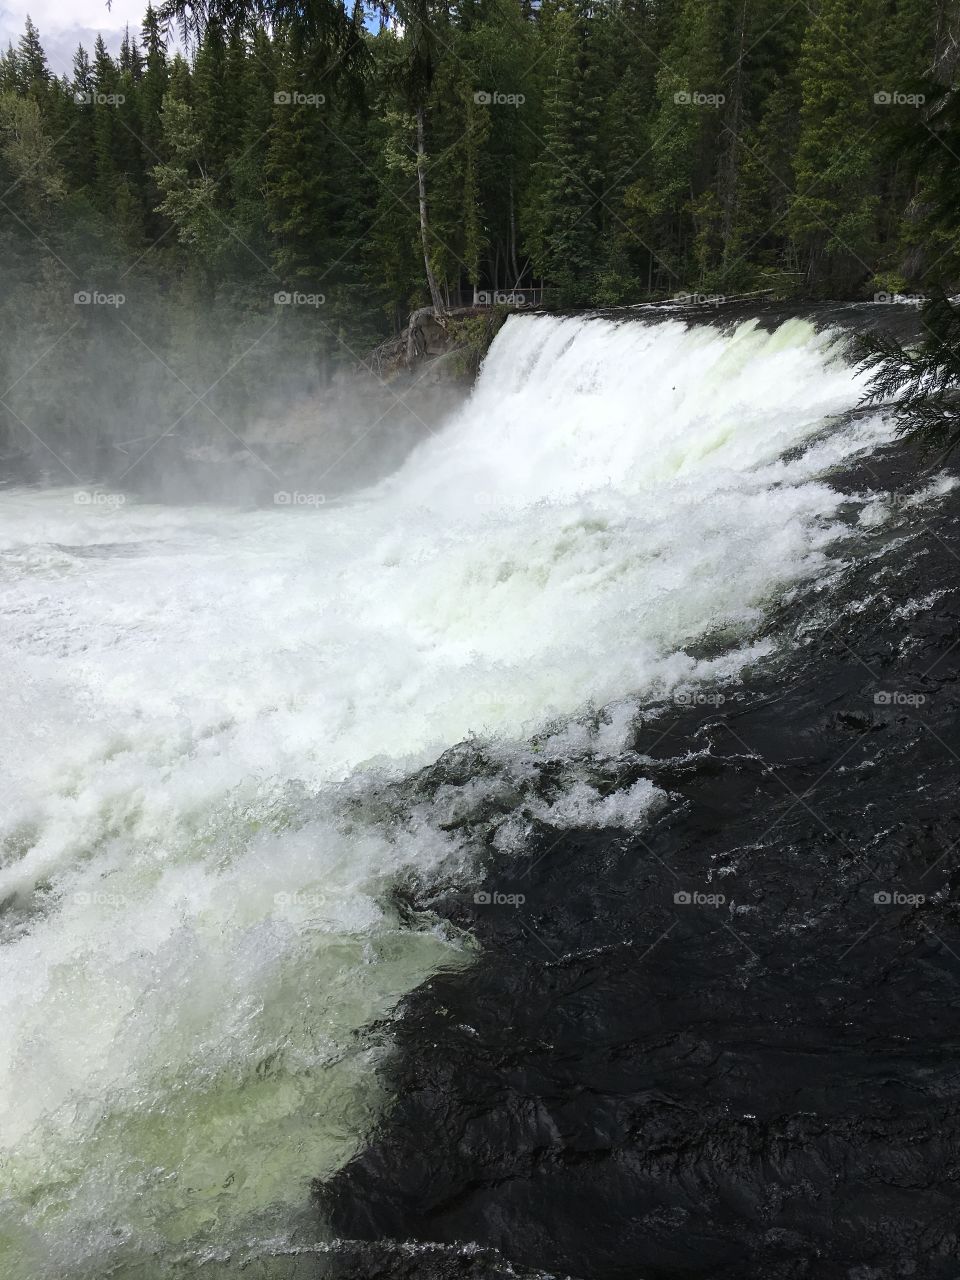 Rushing waters in wells gray park 